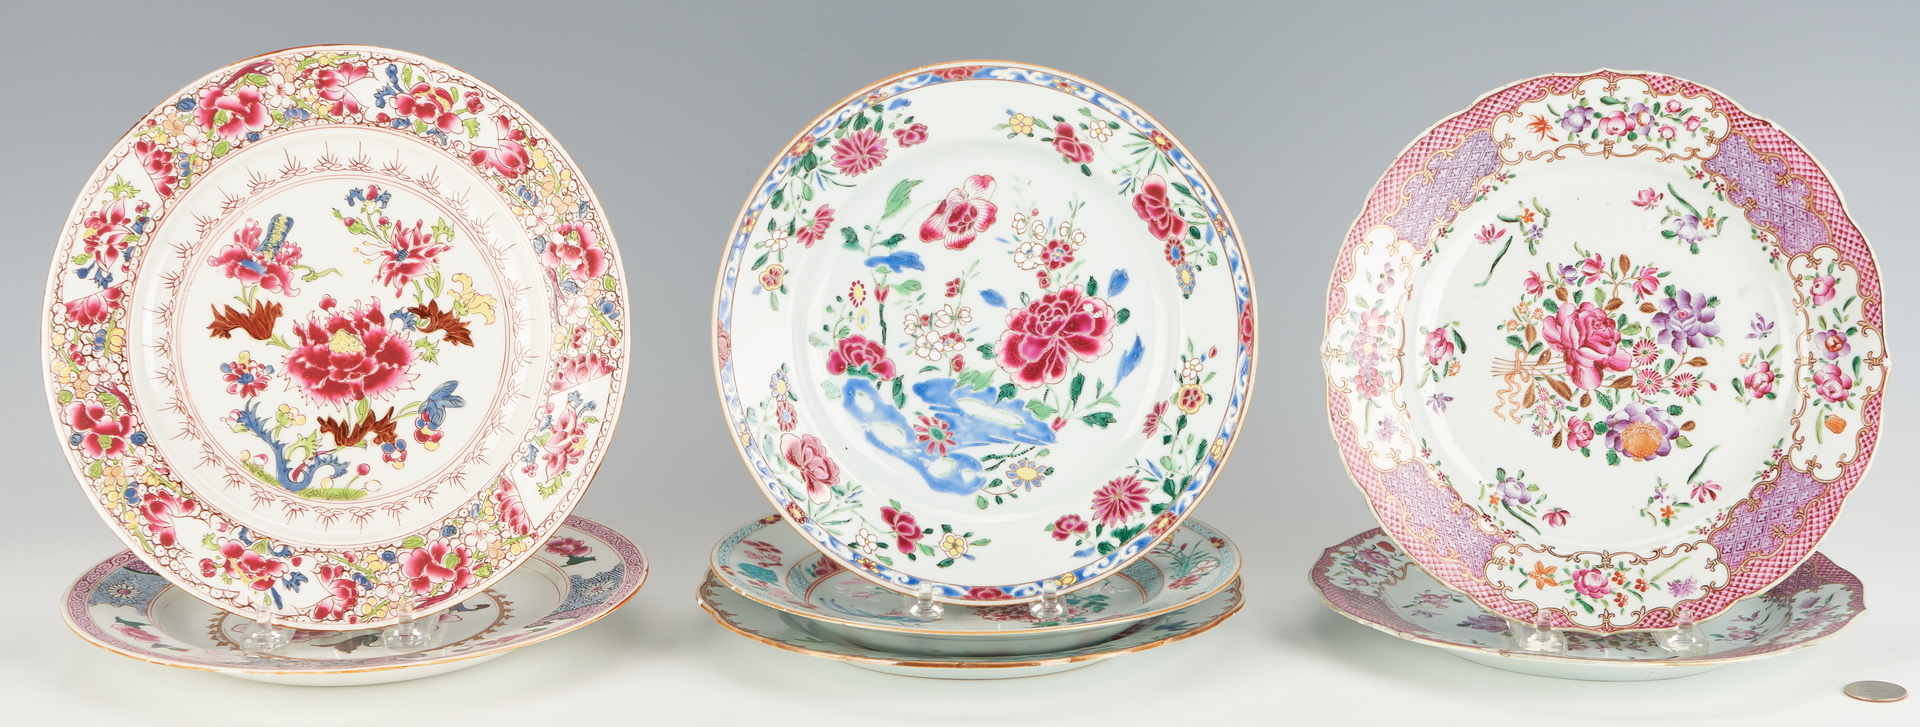 Lot 337: 7 18th Cent. Chinese Export Porcelain Plates